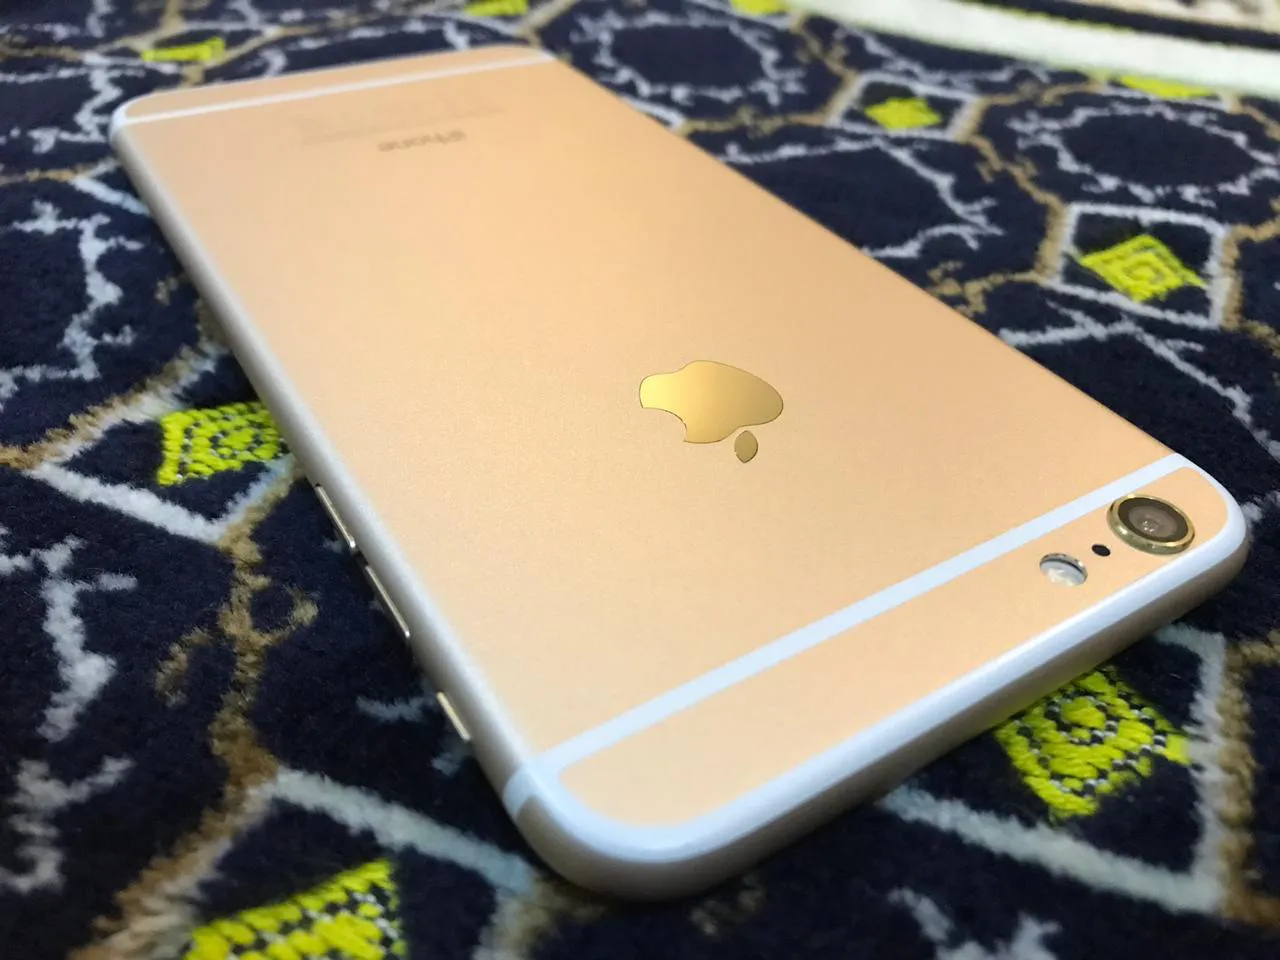 Apple iPhone 6 Plus 16gb Gold just Like Zero 10/10 IMEI Match Complete Accessories - photo 2